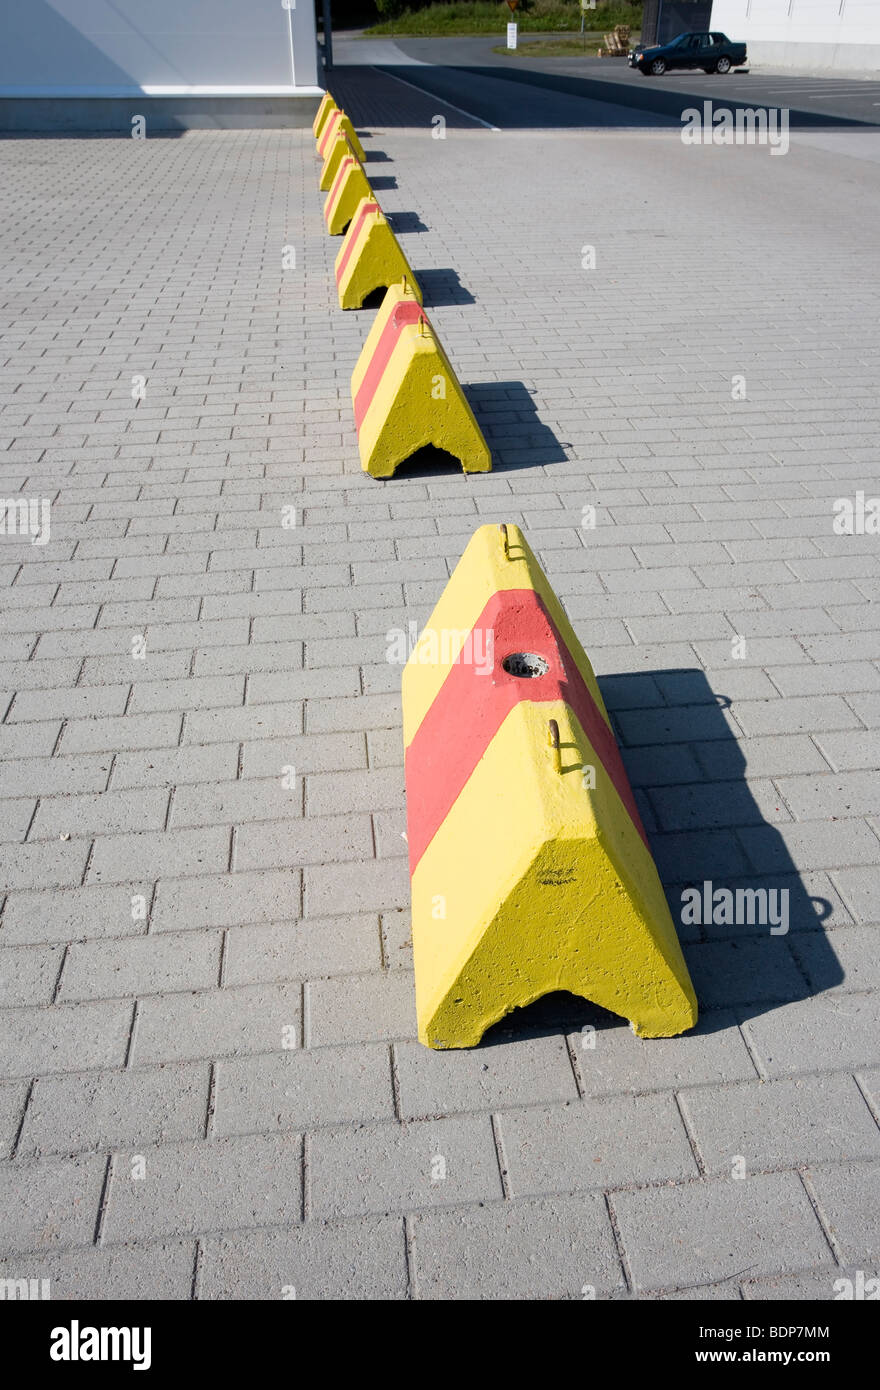 traffic obstacles Stock Photo